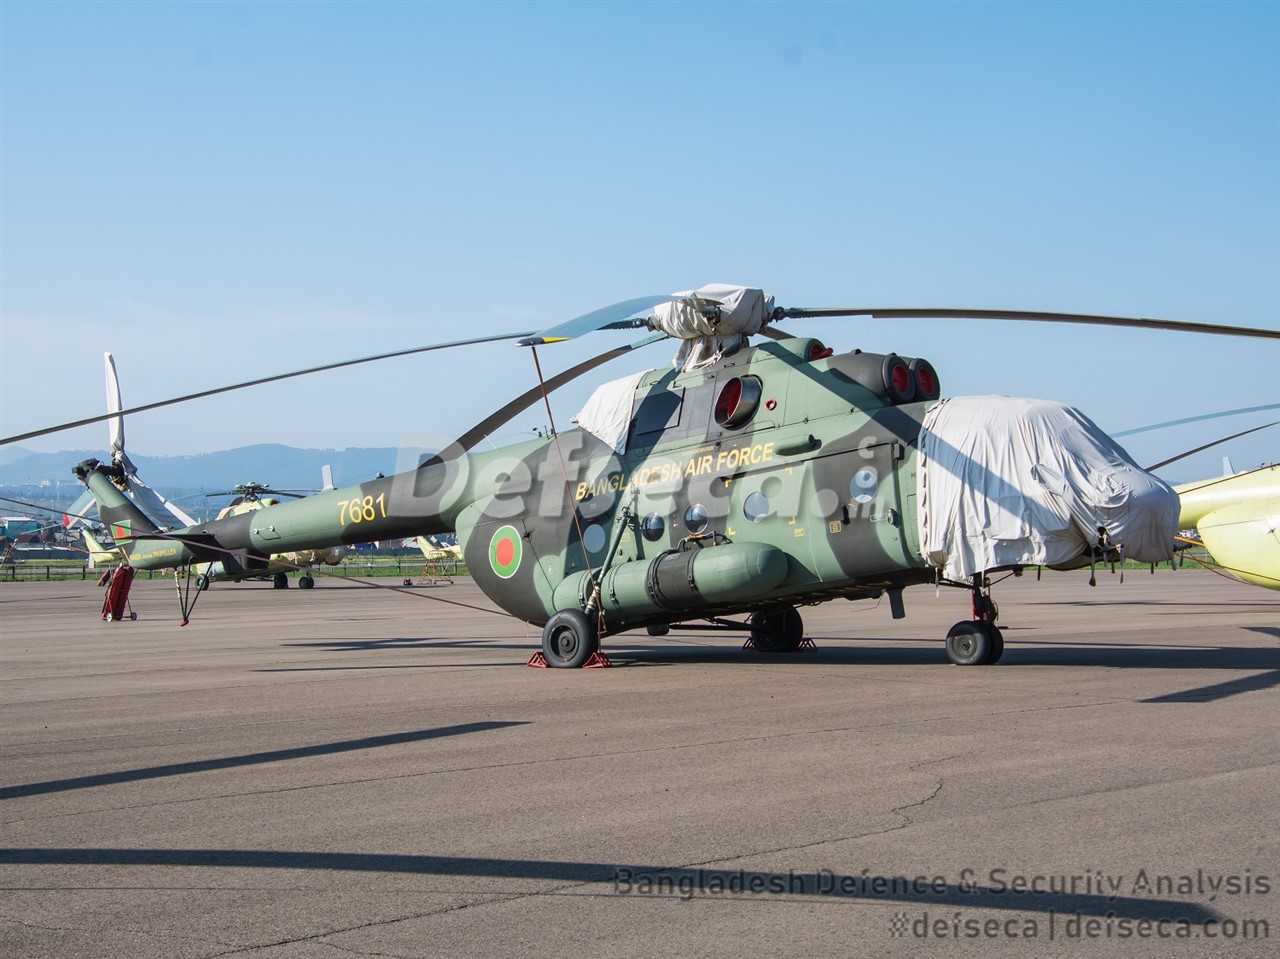 BAF’s second dolphin nosed Mi-171Sh appears